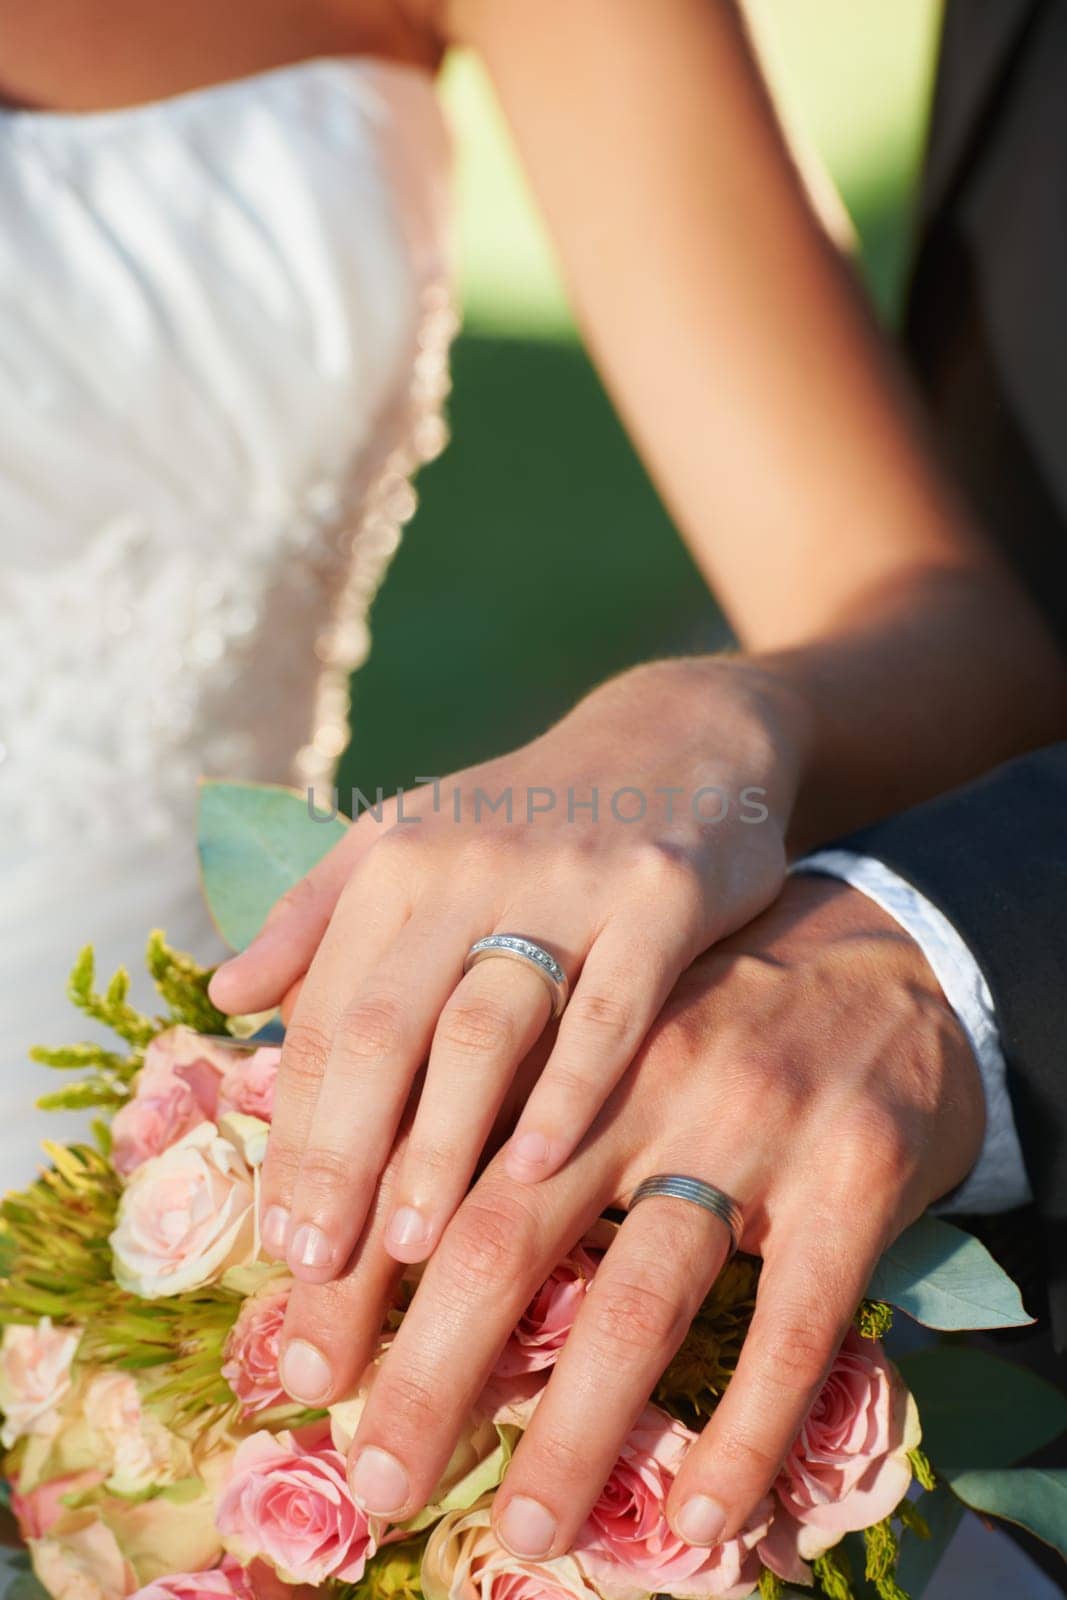 Couple, wedding ring and hands in marriage with rose bouquet at celebration and trust event. Flower, loyalty and care with romance and groom jewelry with love and commitment with woman and man.